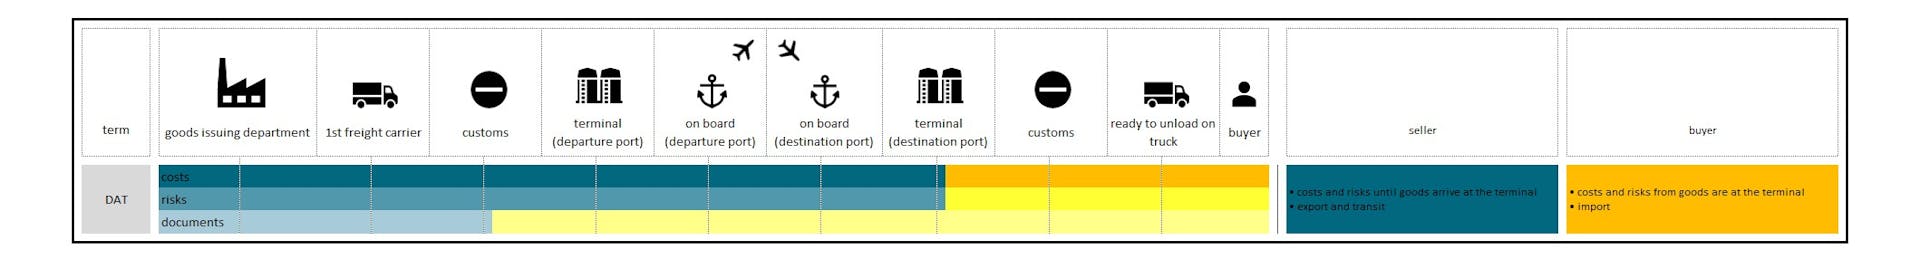 Incoterms 2010 DAT